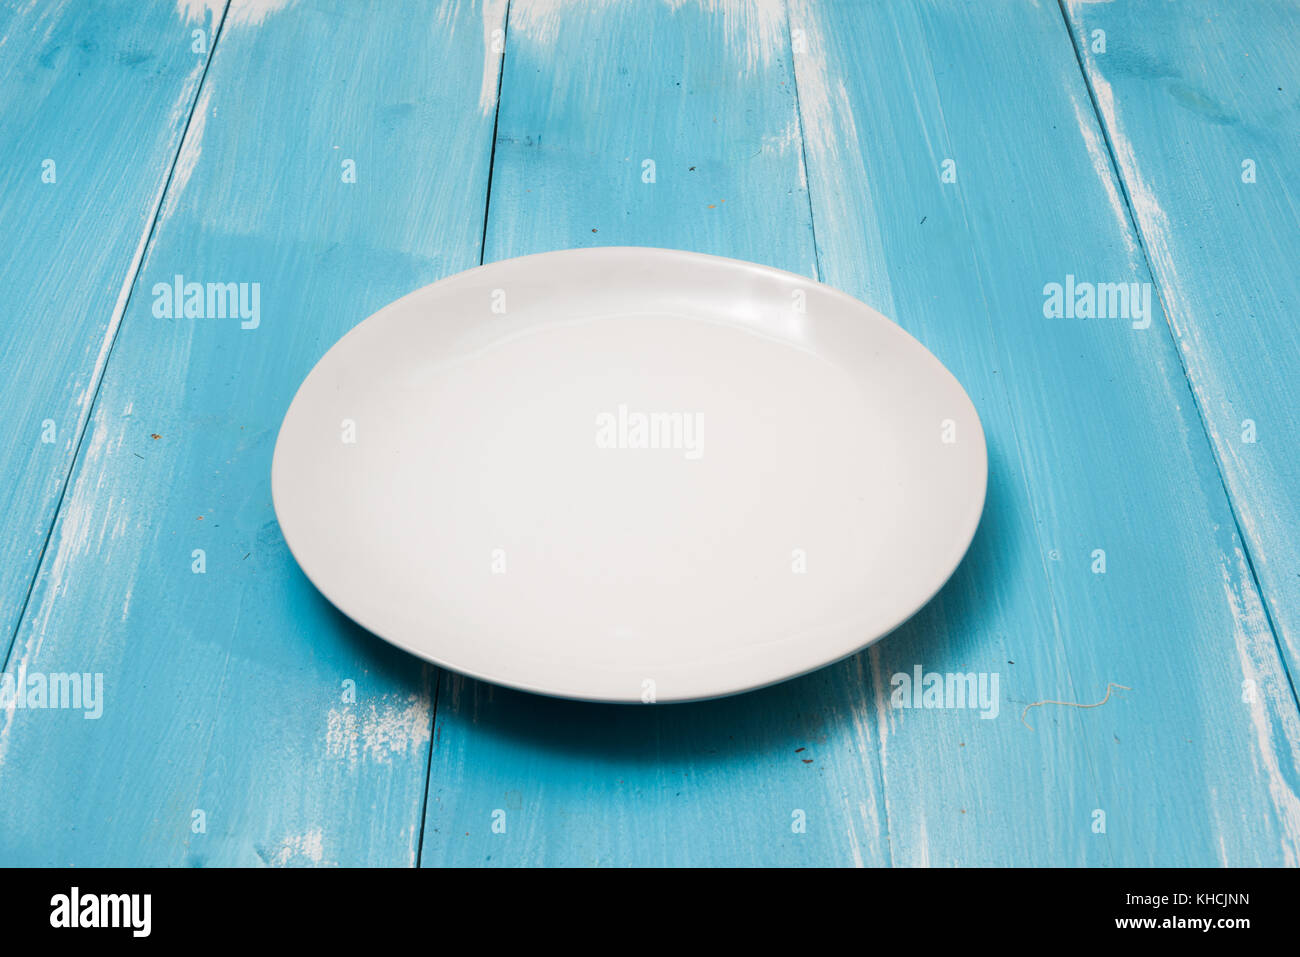 White Round plate on blue wooden table with perspective side view Stock Photo